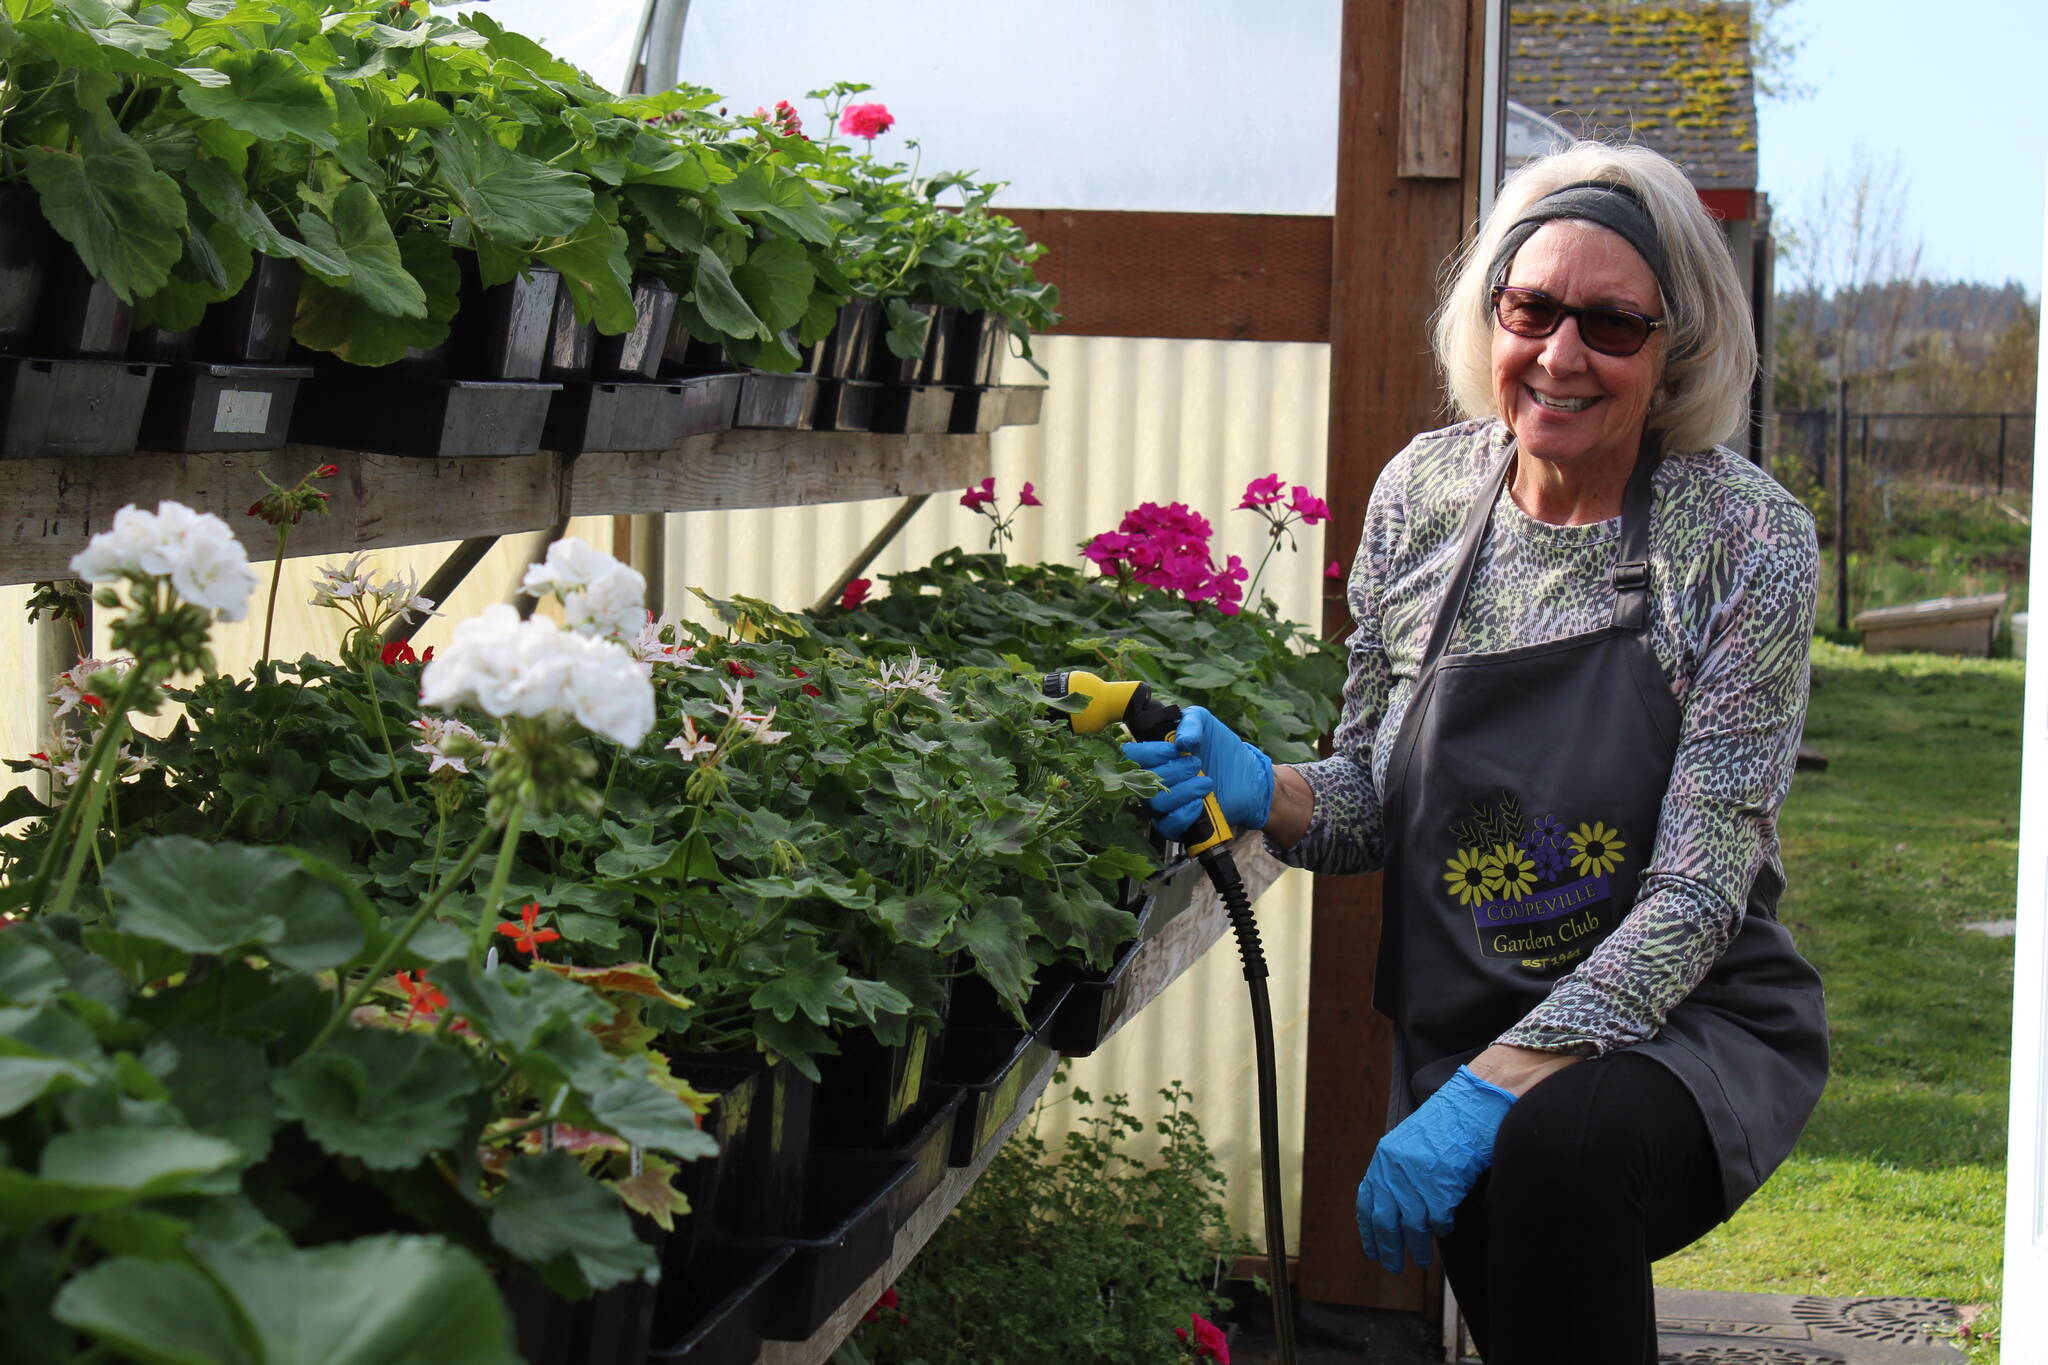 Brenda Faris waters plants in the Coupeville Garden Club greenhouse in advance of the annual plant sale. Around 3,500 plants will be available for purchase at this year’s event. (Photo by Karina Andrew/Whidbey News-Times)